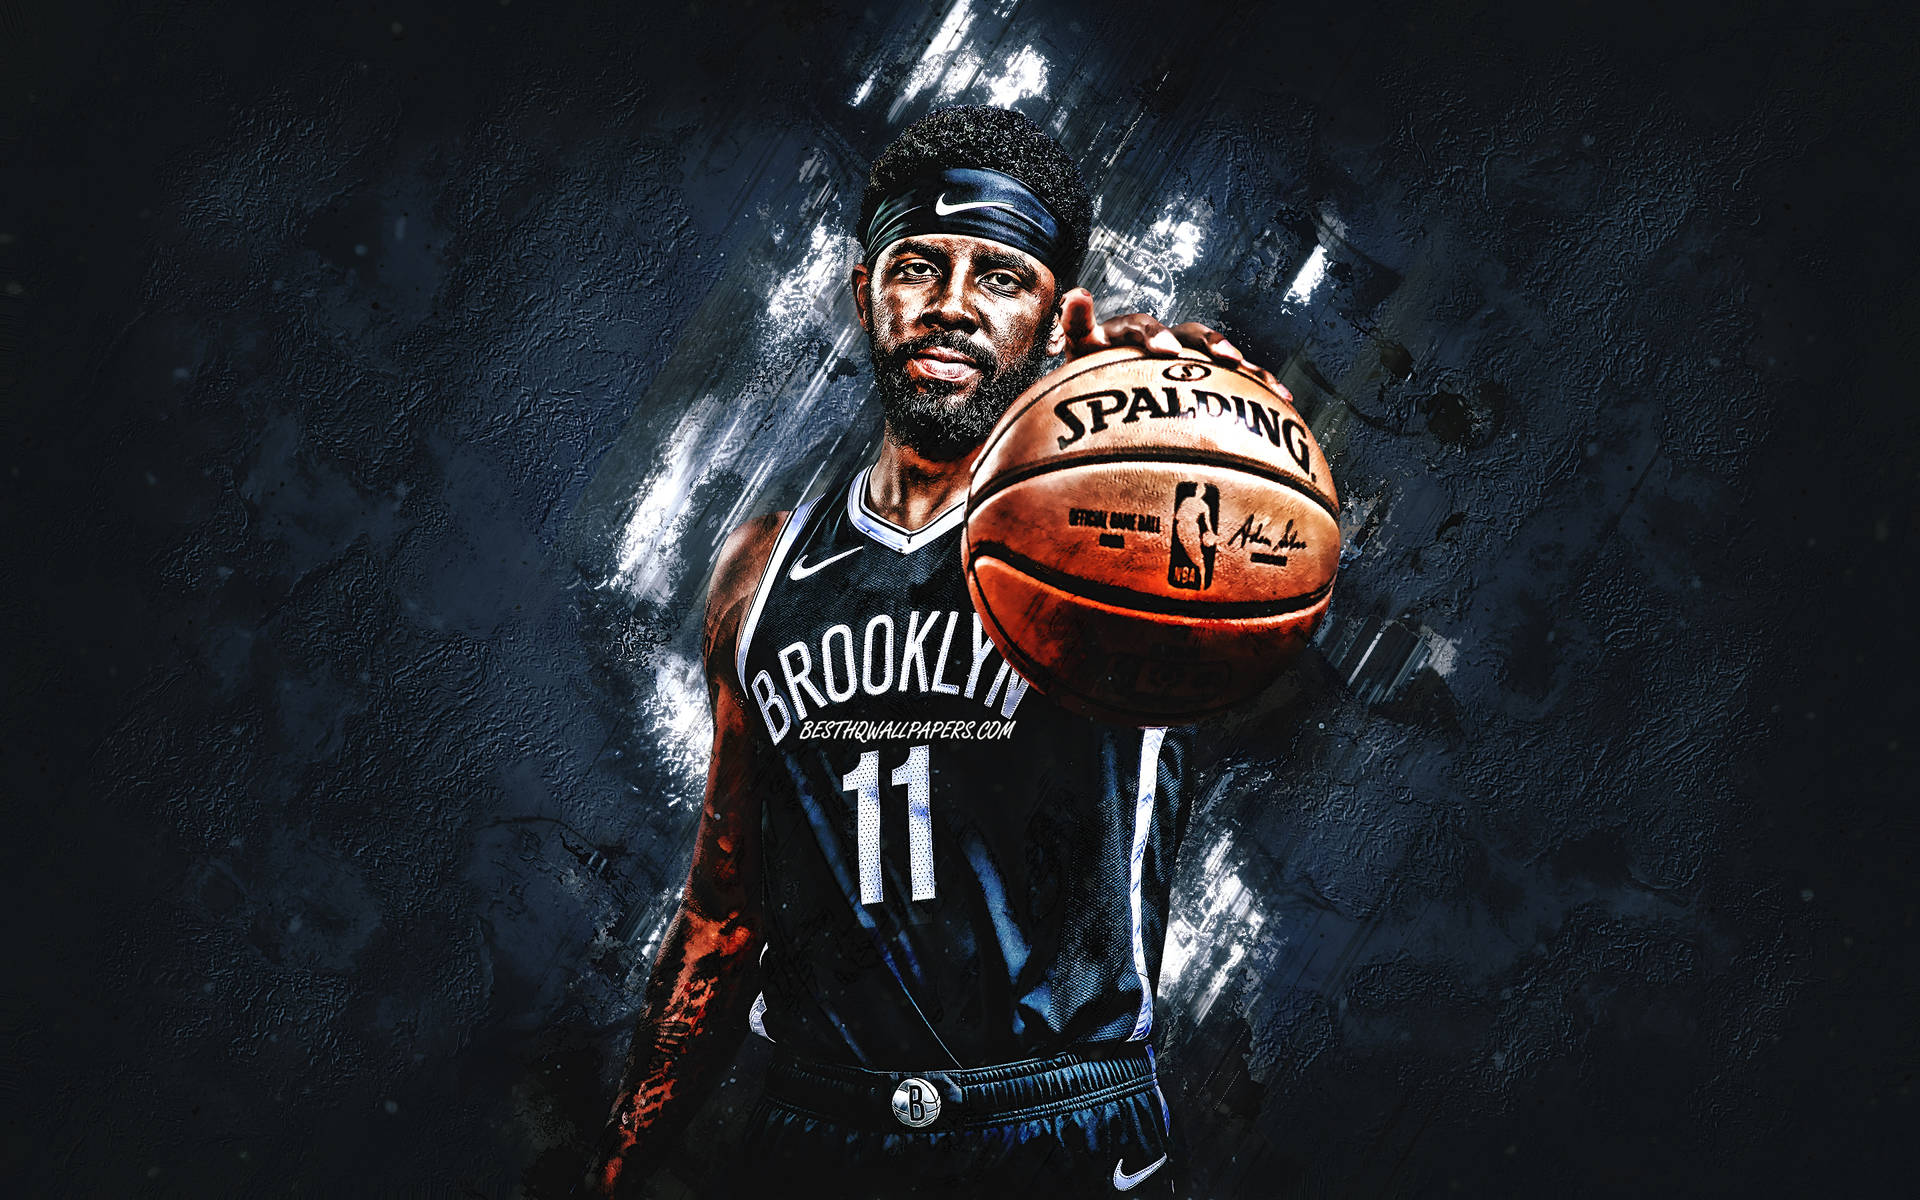 Share 74 Kyrie Irving Wallpaper Nets Latest Incdgdbentre